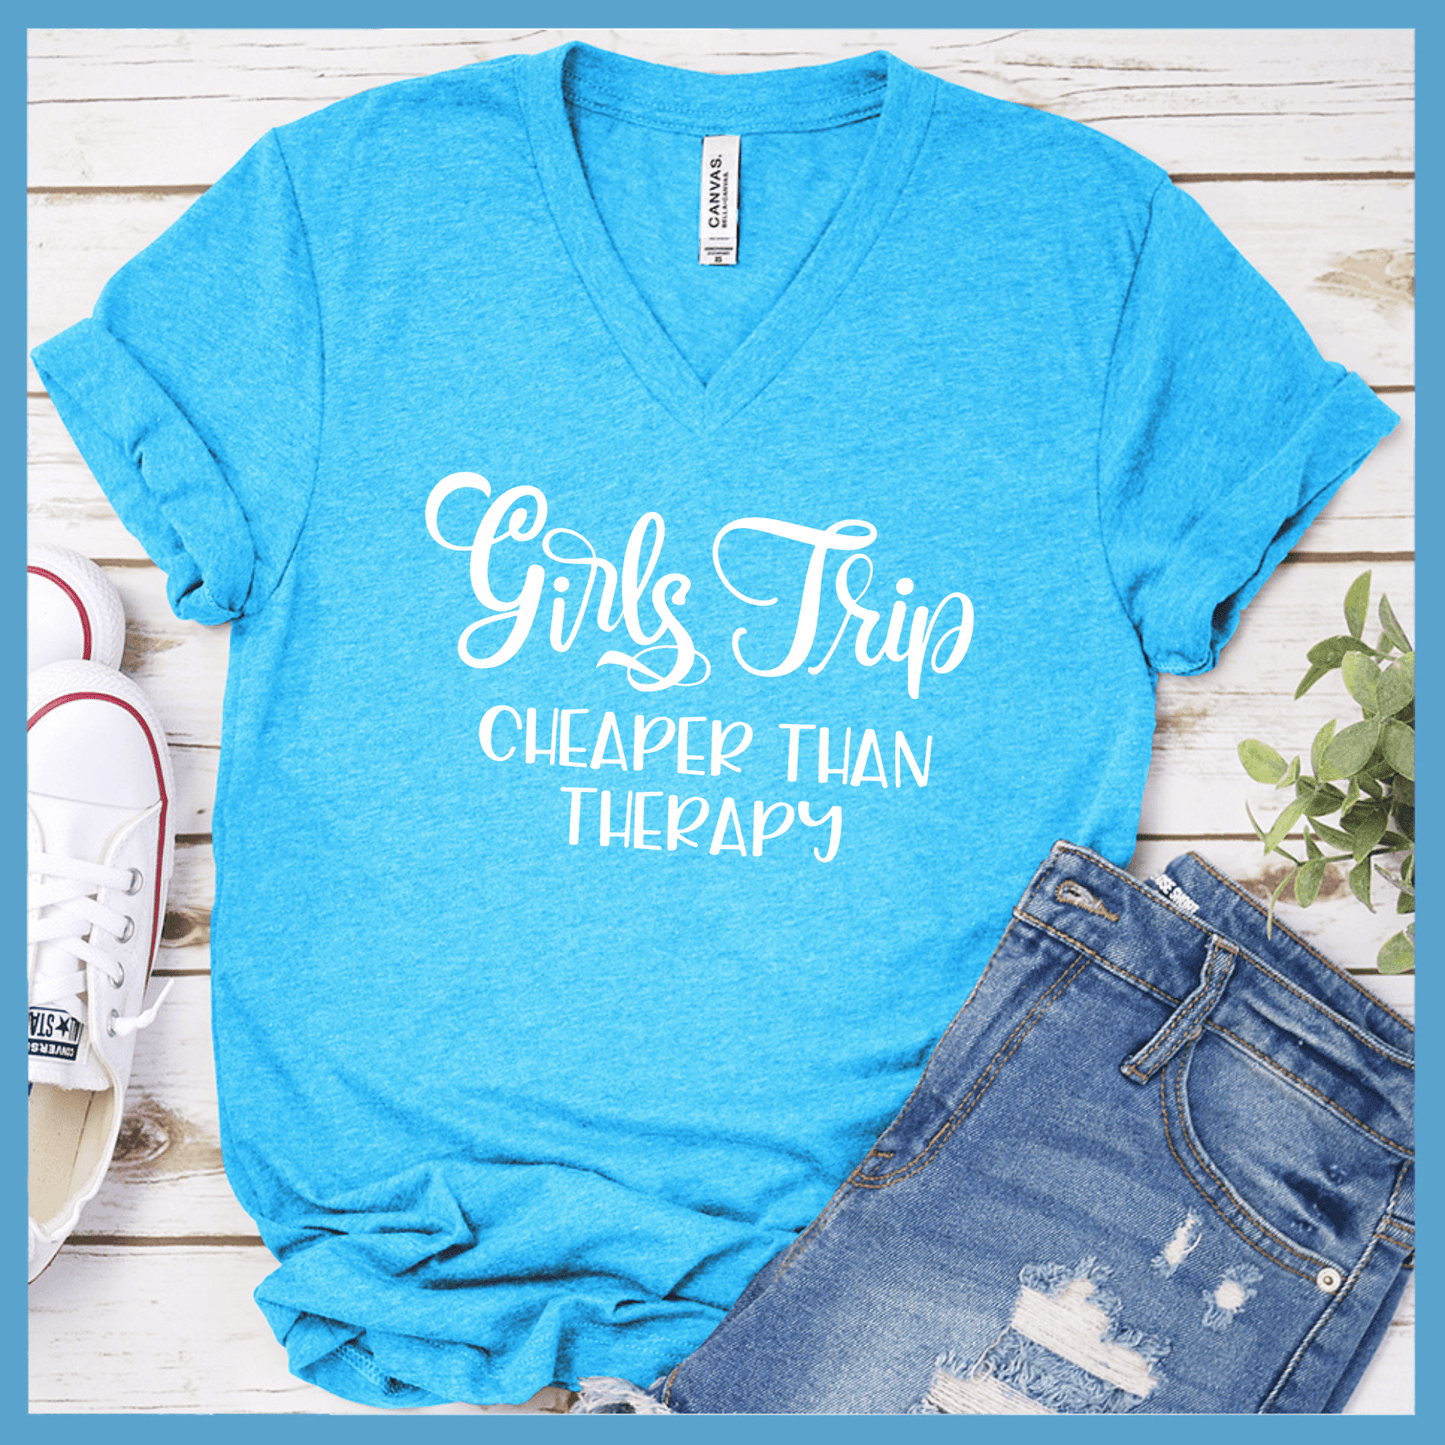 Girls Trip V-Neck Neon Blue - Girls Trip V-Neck T-shirt with fun quote, ideal for group travel and bonding.